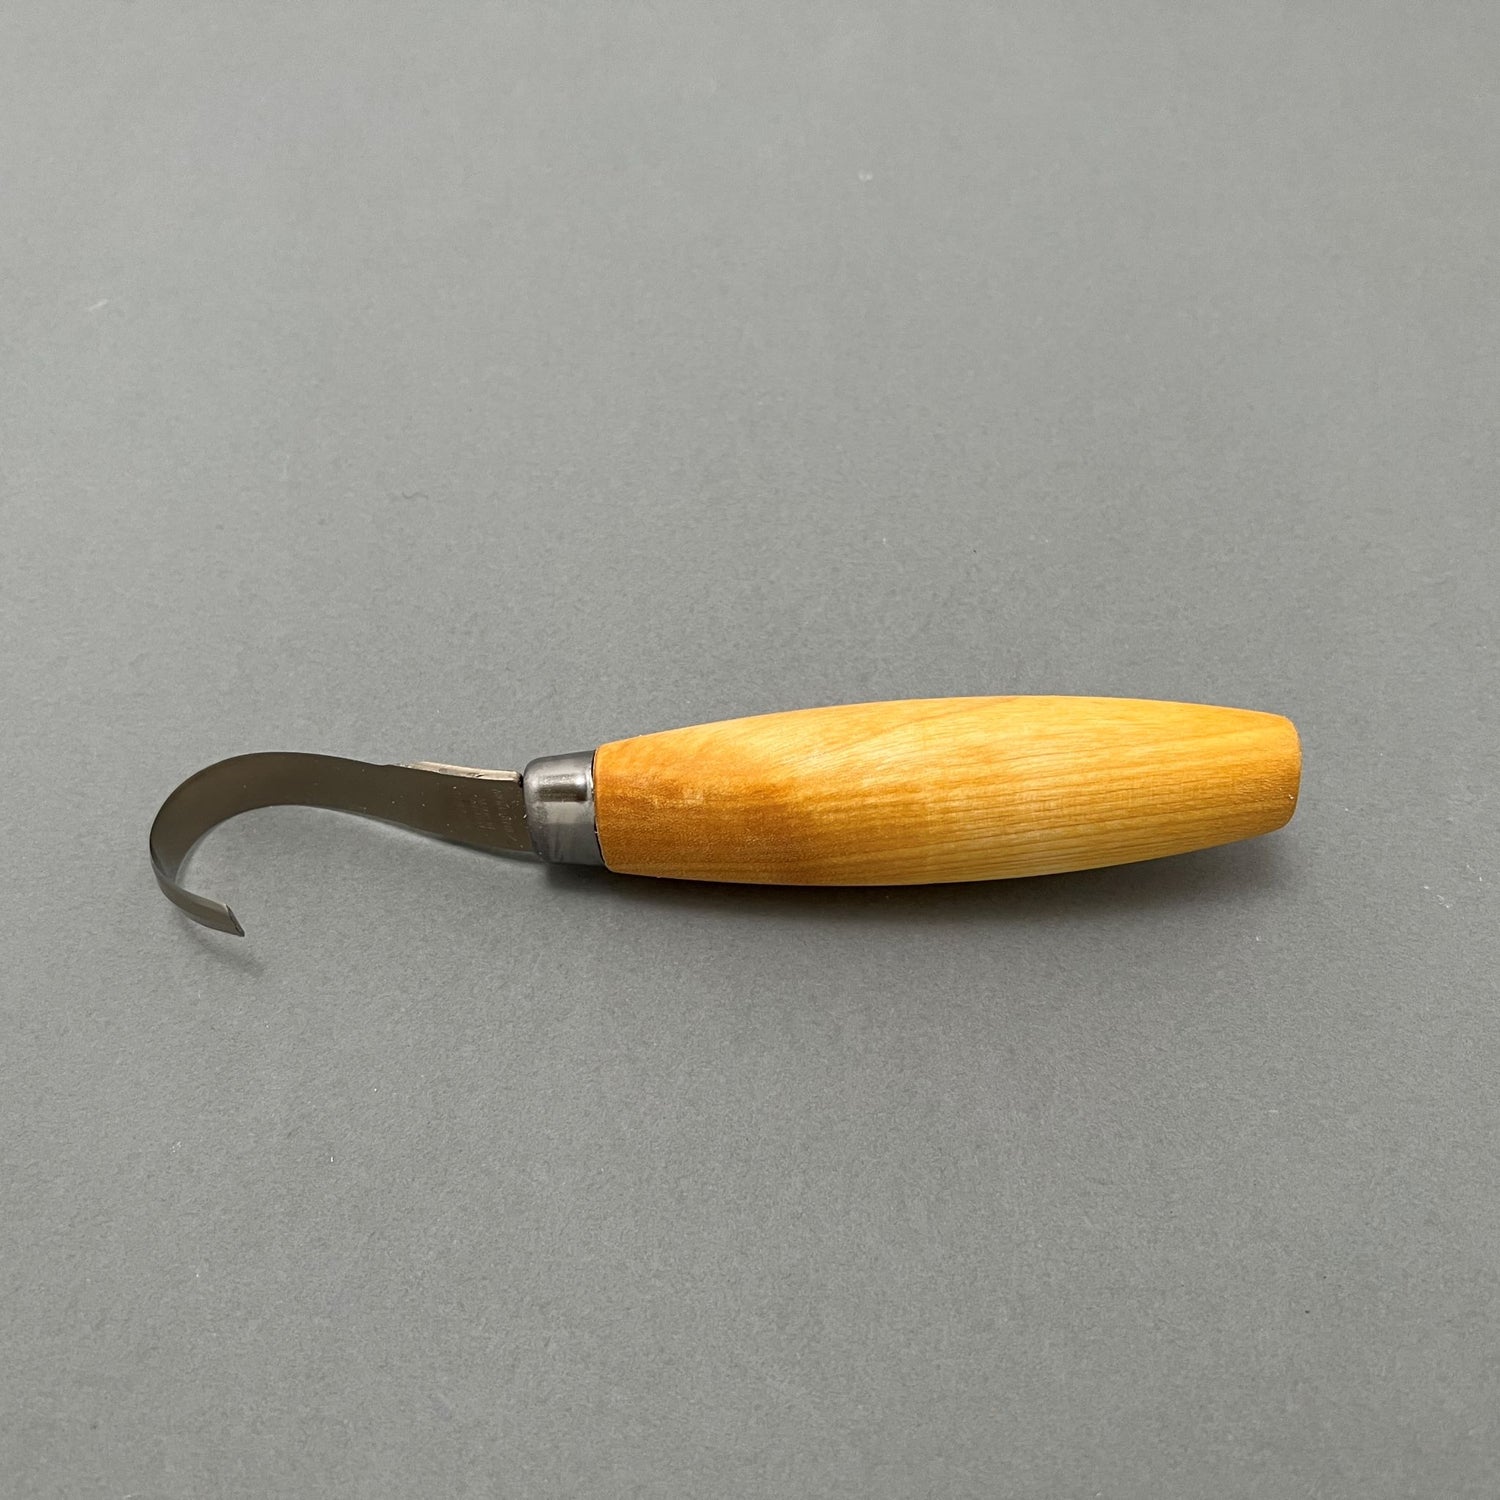 A steel hook knife with a wooden handle laying on a gray background